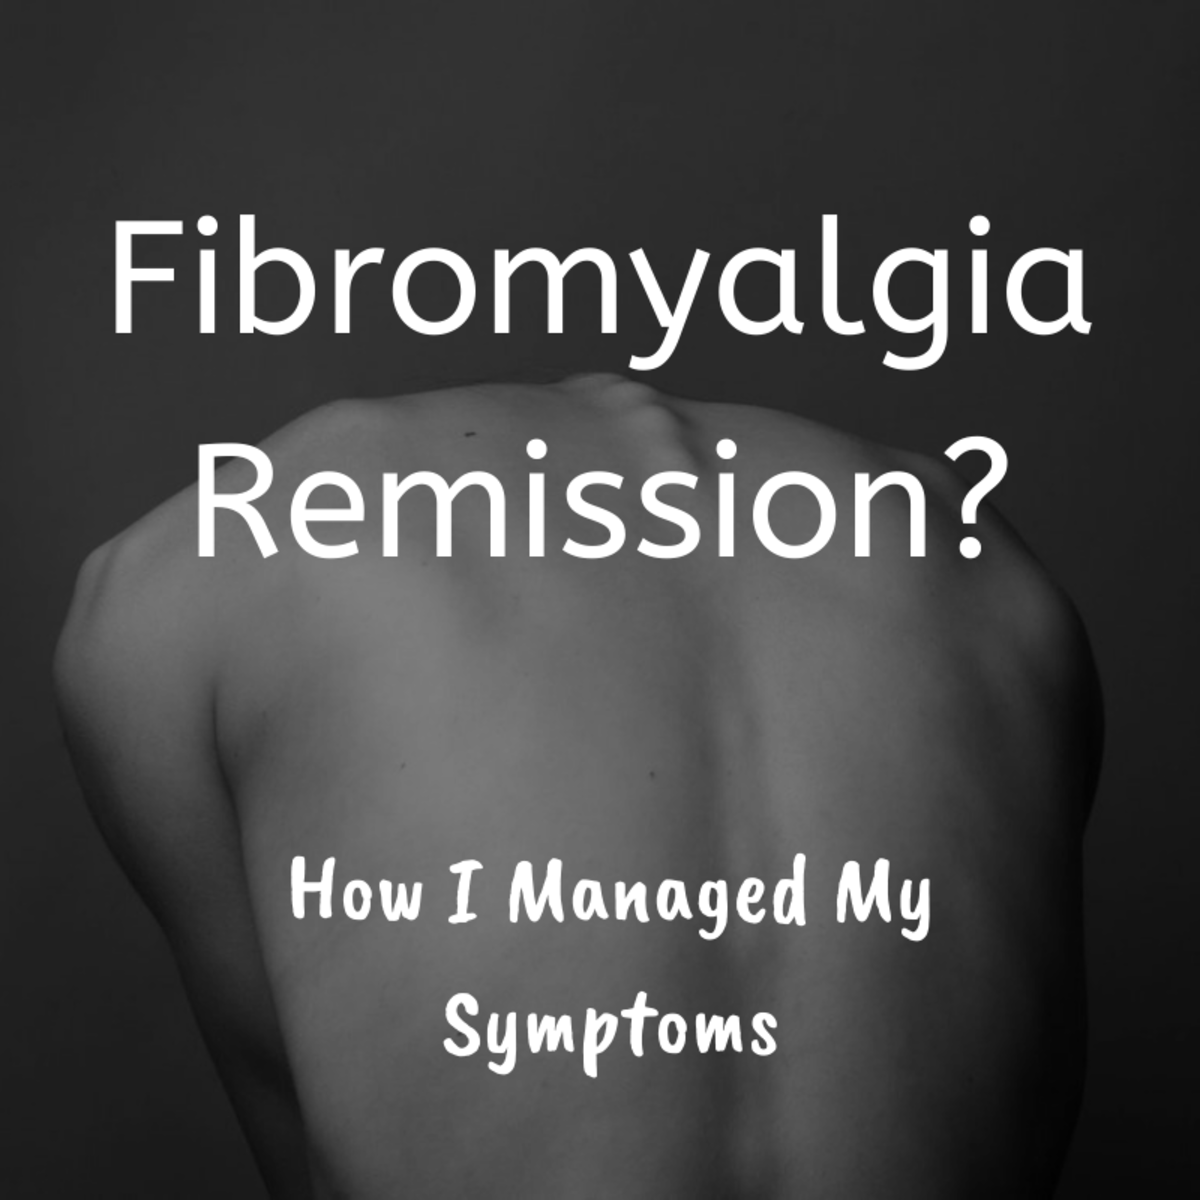 Fibromyalgia cannot yet be cured, but there are ways you can manage your symptoms. Here's how I did it.